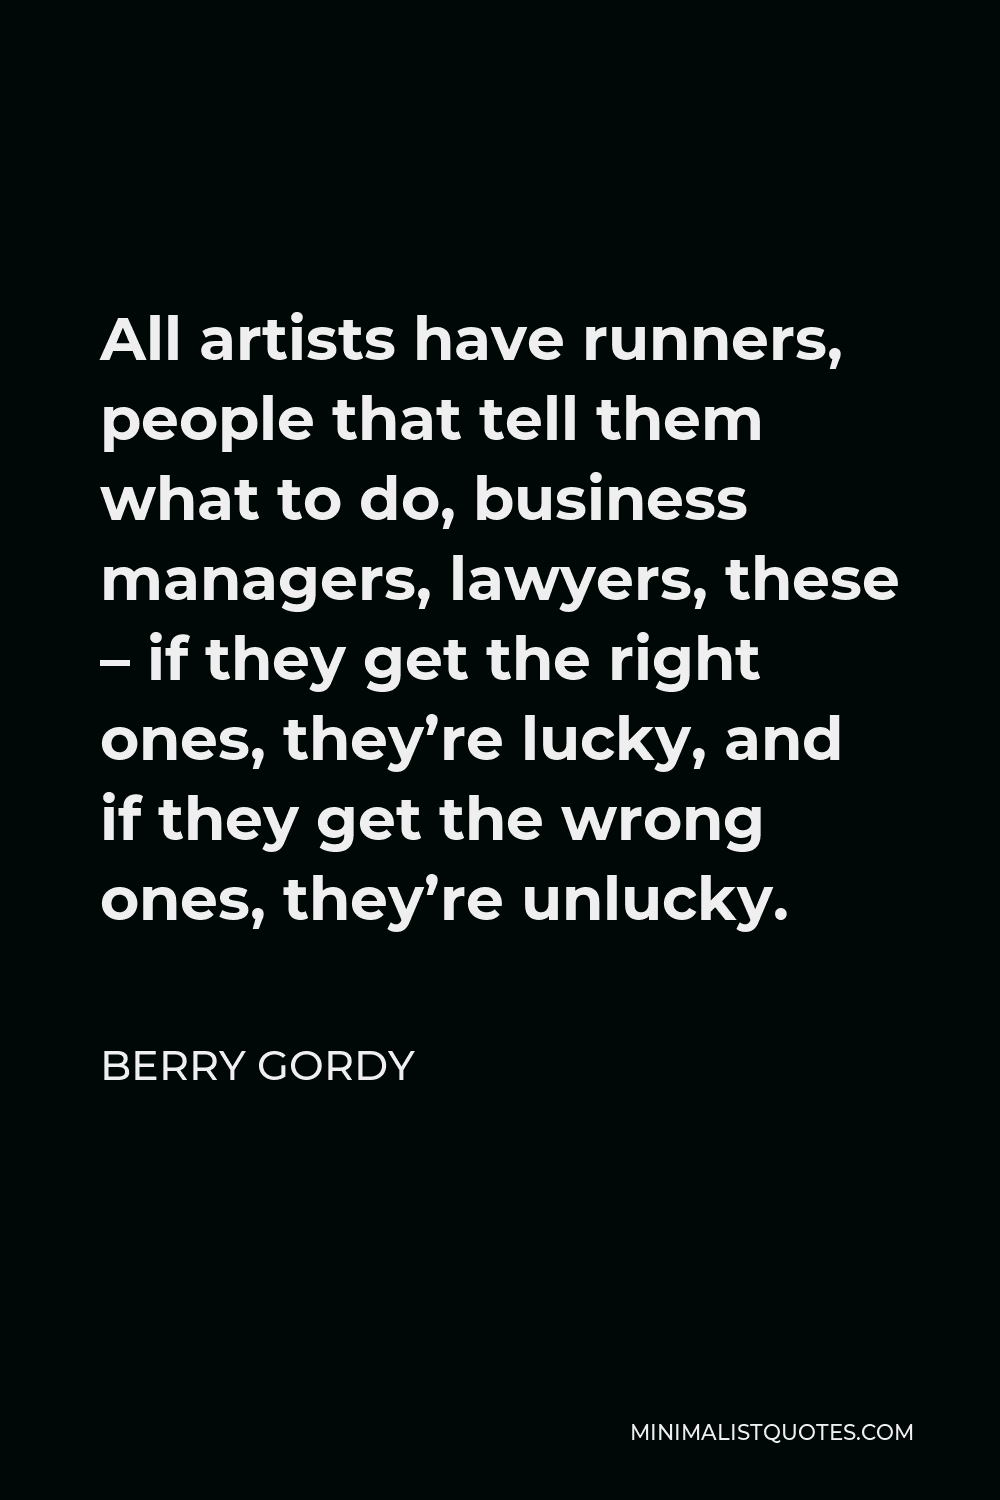 Berry Gordy Quote - All artists have runners, people that tell them what to do, business managers, lawyers, these – if they get the right ones, they’re lucky, and if they get the wrong ones, they’re unlucky.